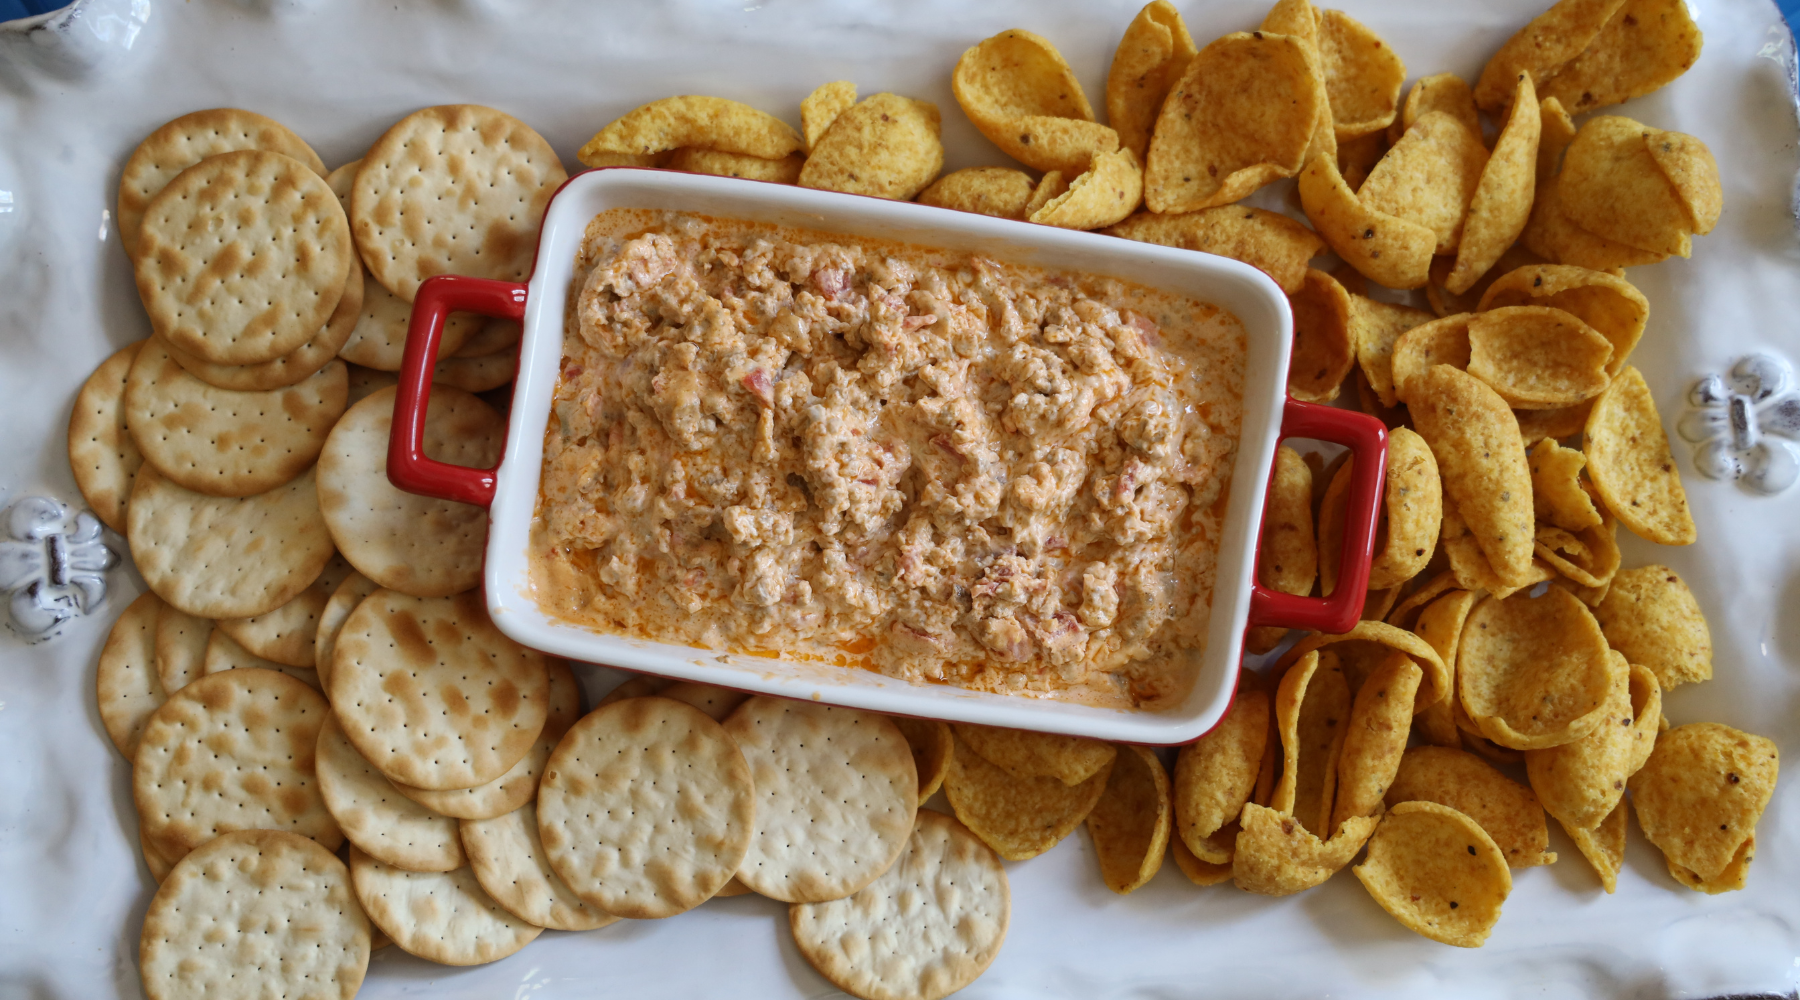 Our ultimate Super Bowl snacks include Big Delicious Dip with chips 